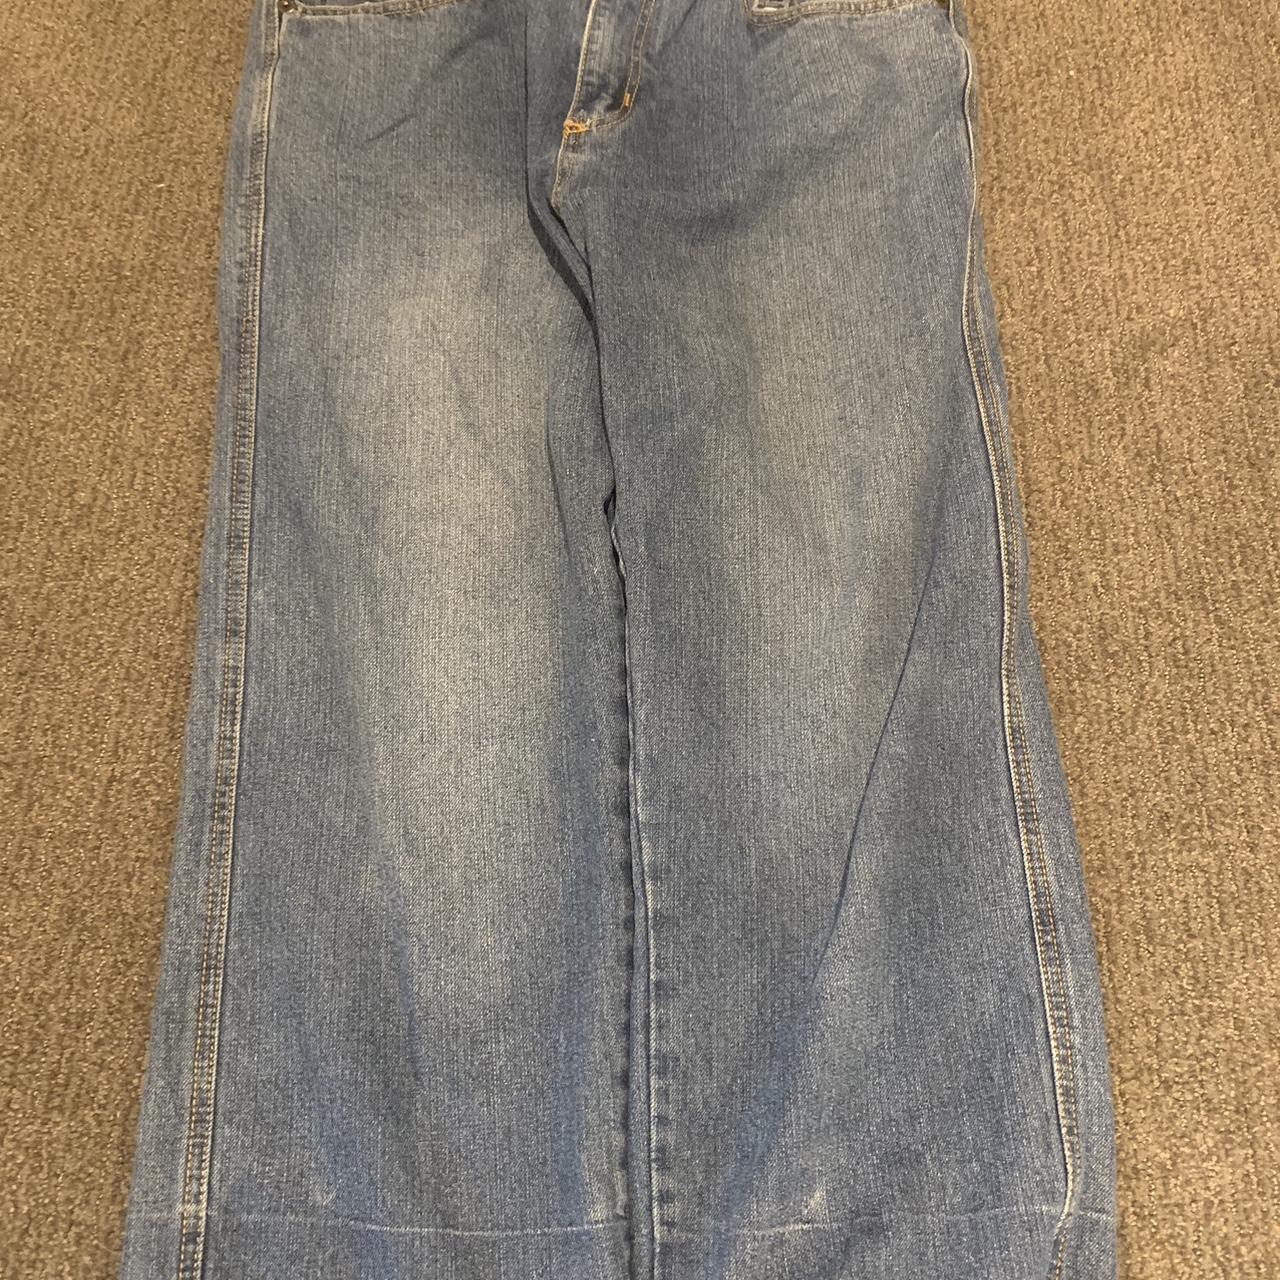 Insane styli baggy fit jeans remind me of my jncos... - Depop